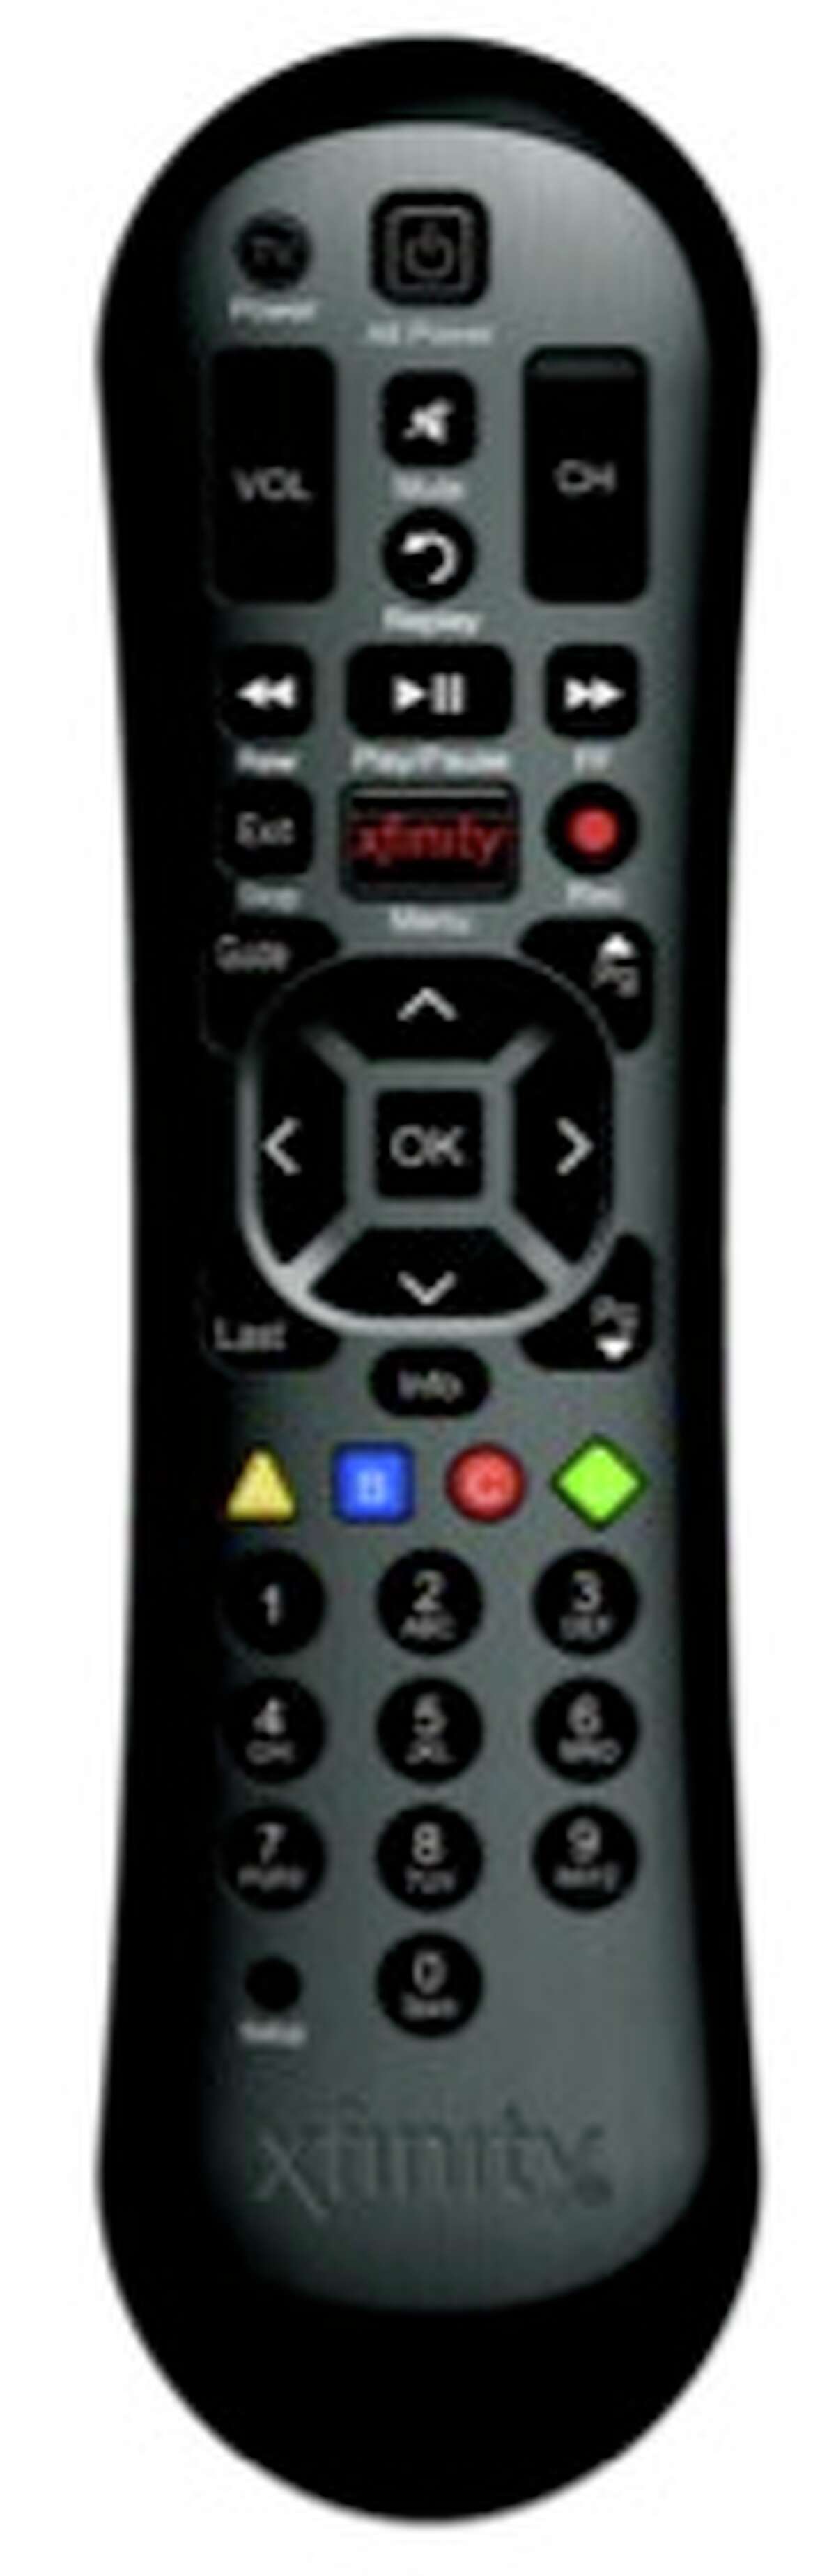 The new service also offers a redesigned remote control, the first one in at least 10 years. (Comcast photo)